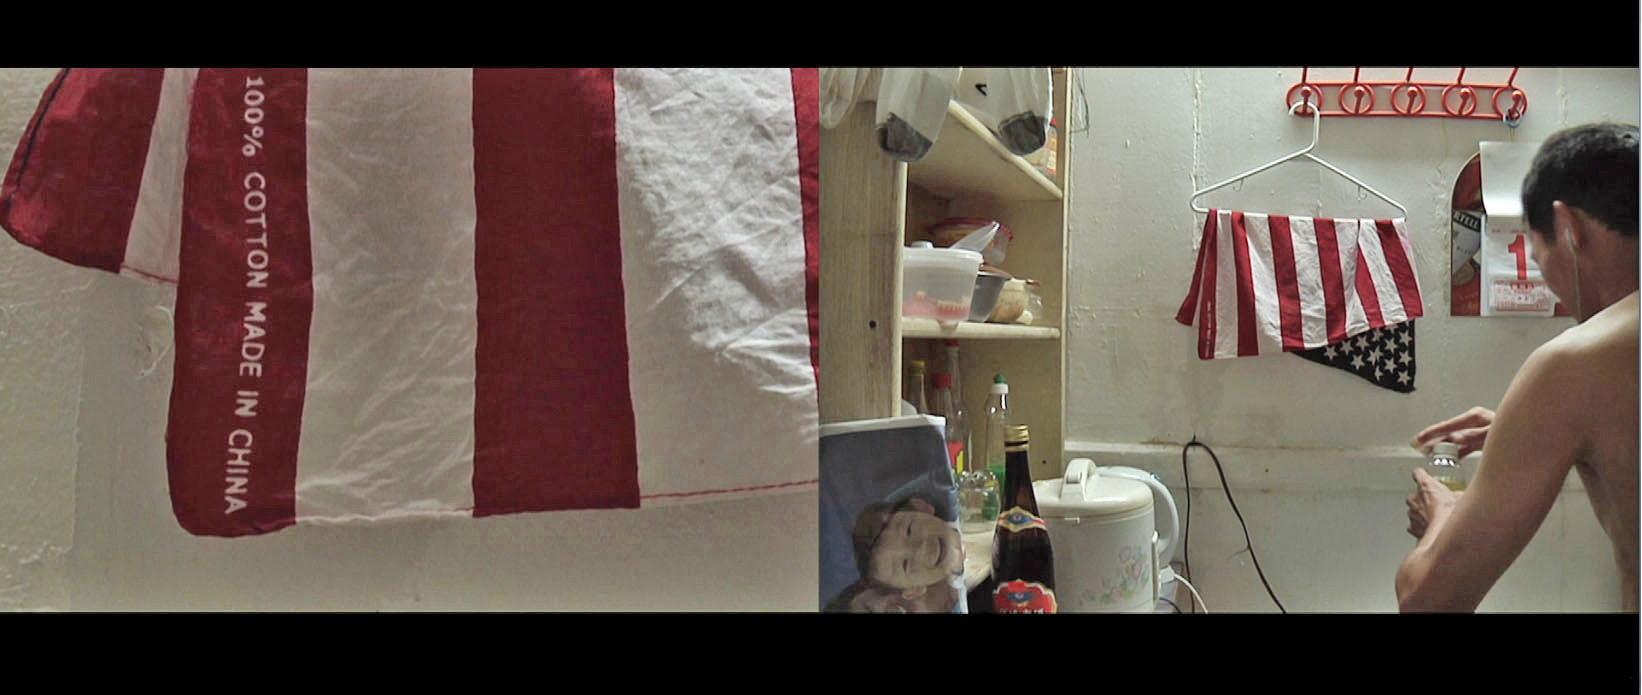 A split screen shows a man cooking shirtless in the kitchen, and a closeup of a hanging American flag that says "100% cotton made in China"